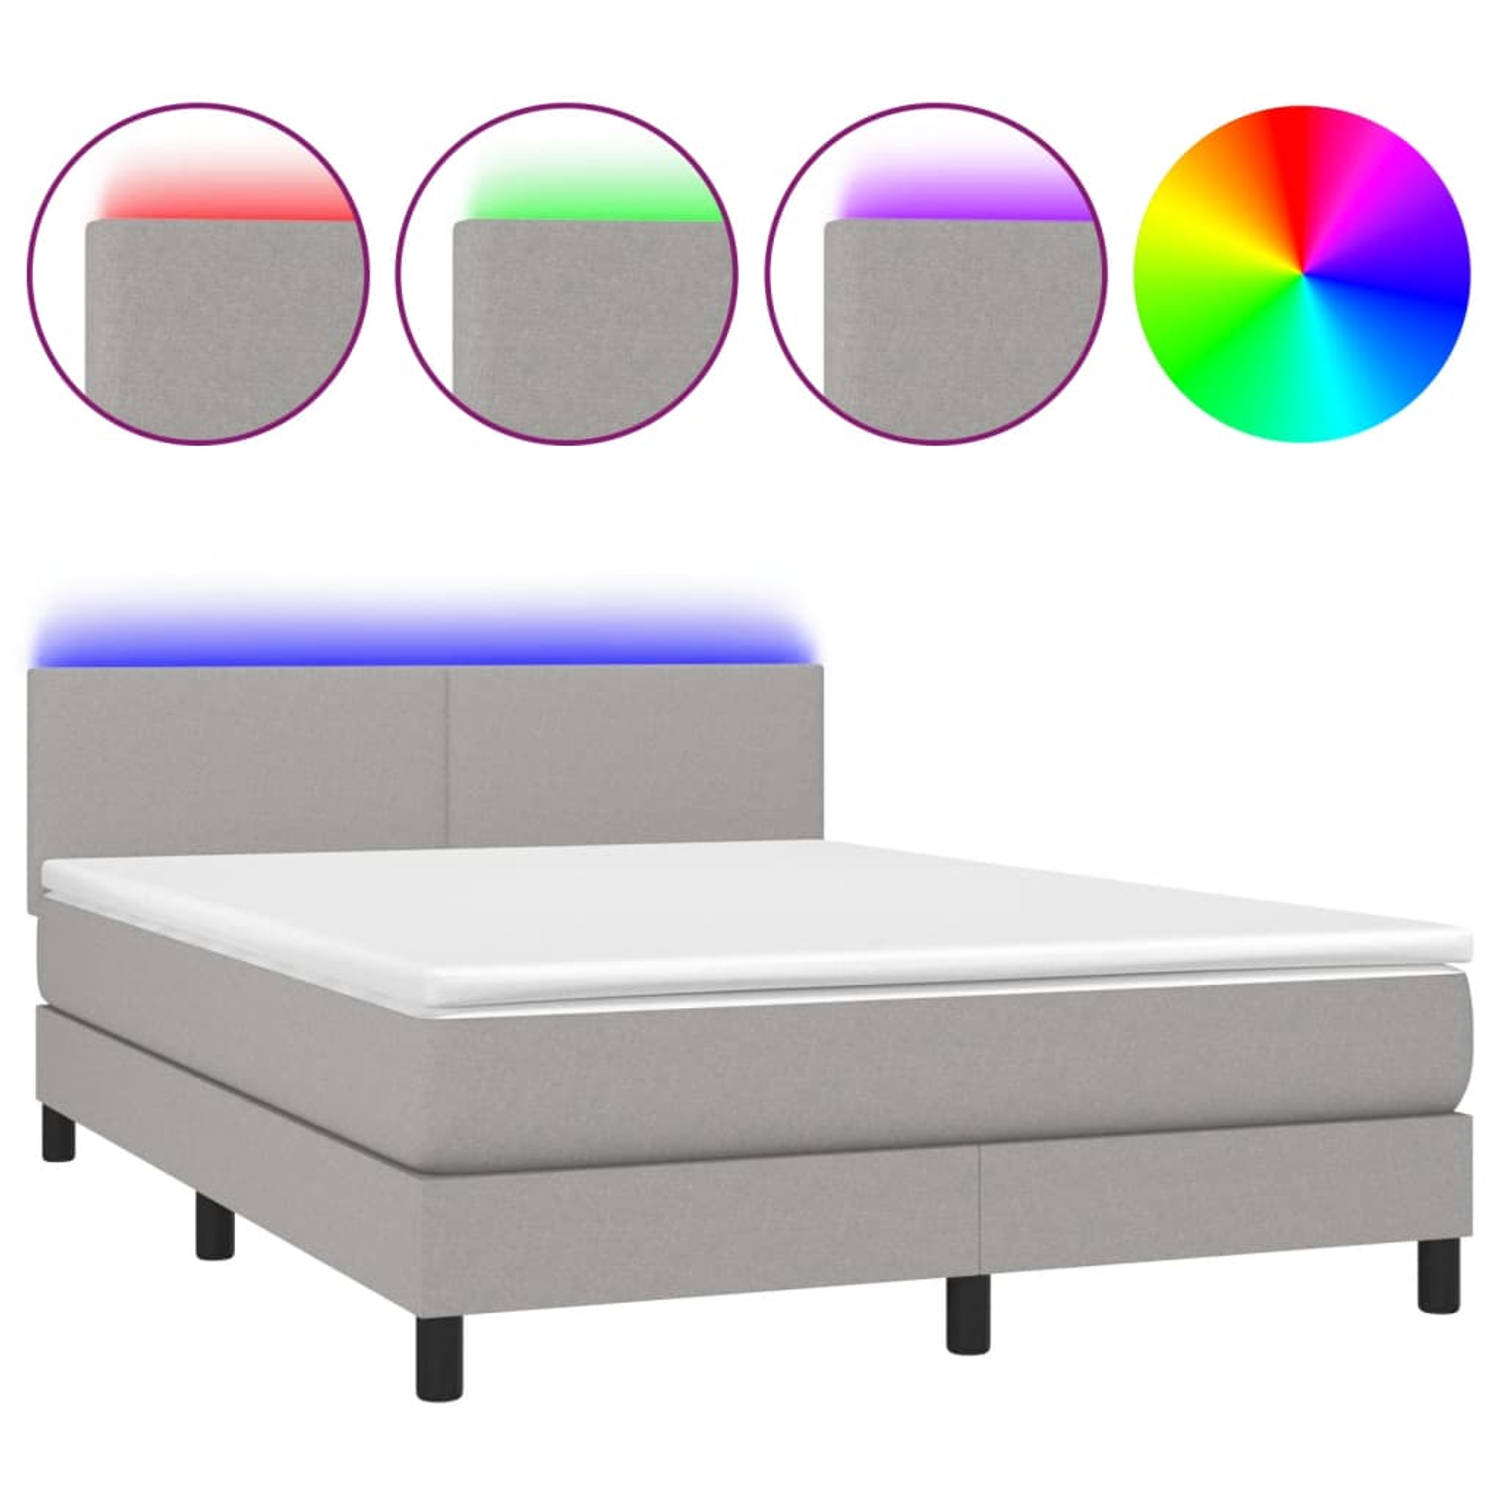 The Living Store Boxspring met matras en LED stof lichtgrijs 140x190 cm - Boxspring - Boxsprings - Bed - Slaapmeubel - Boxspringbed - Boxspring Bed - Tweepersoonsbed - Bed Met Matr